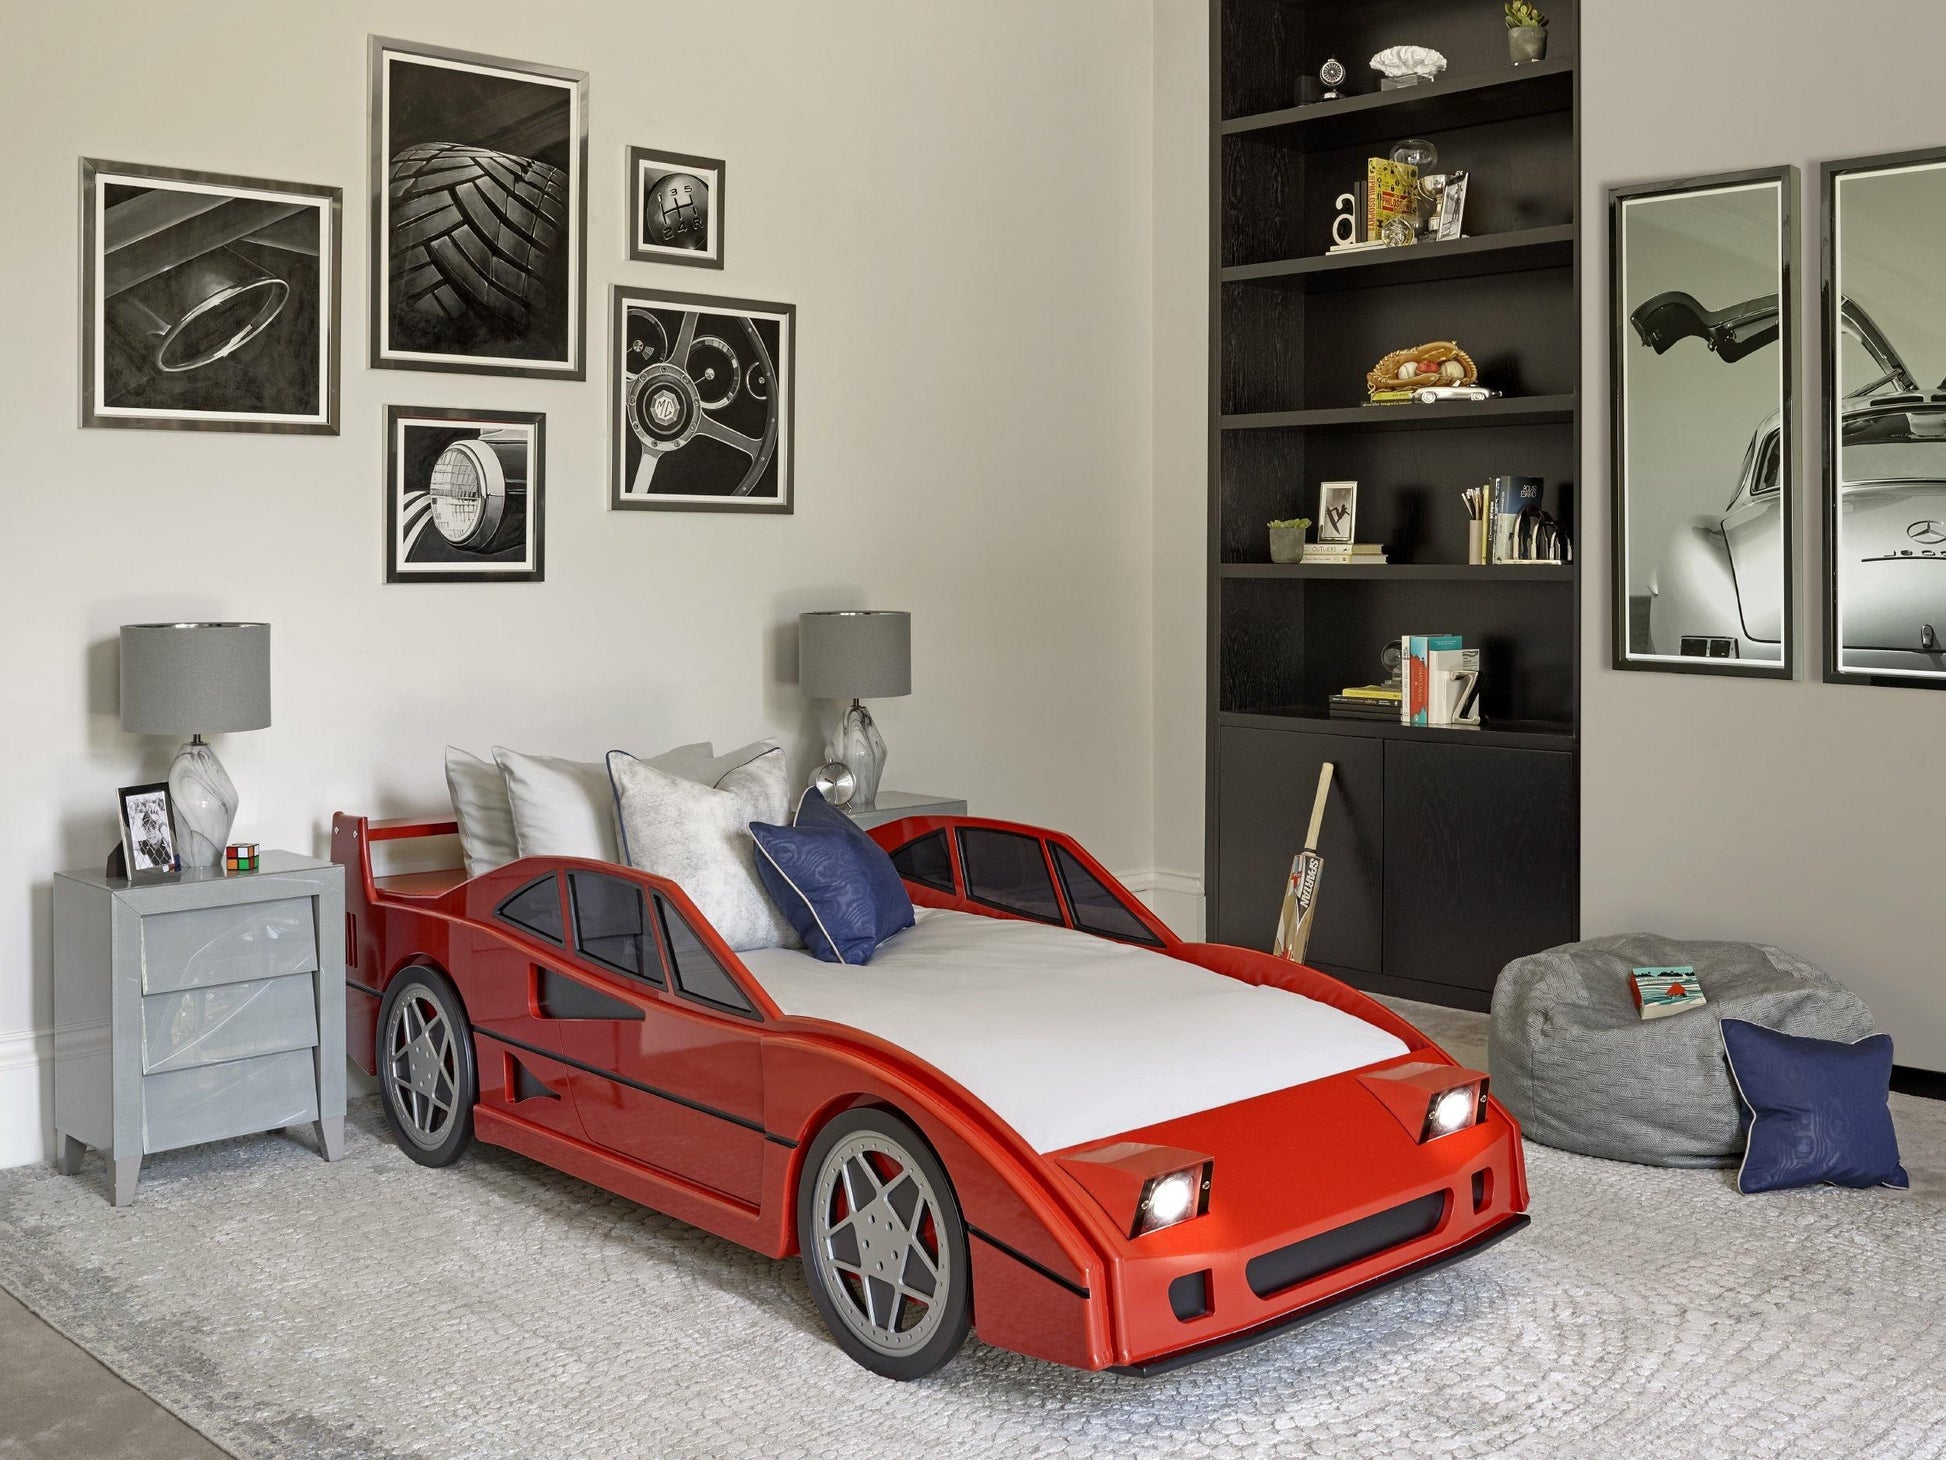 The Dragons RC79 - Single Racing Car Bed in Red - Children's race car bed  | Dragons of Walton Street